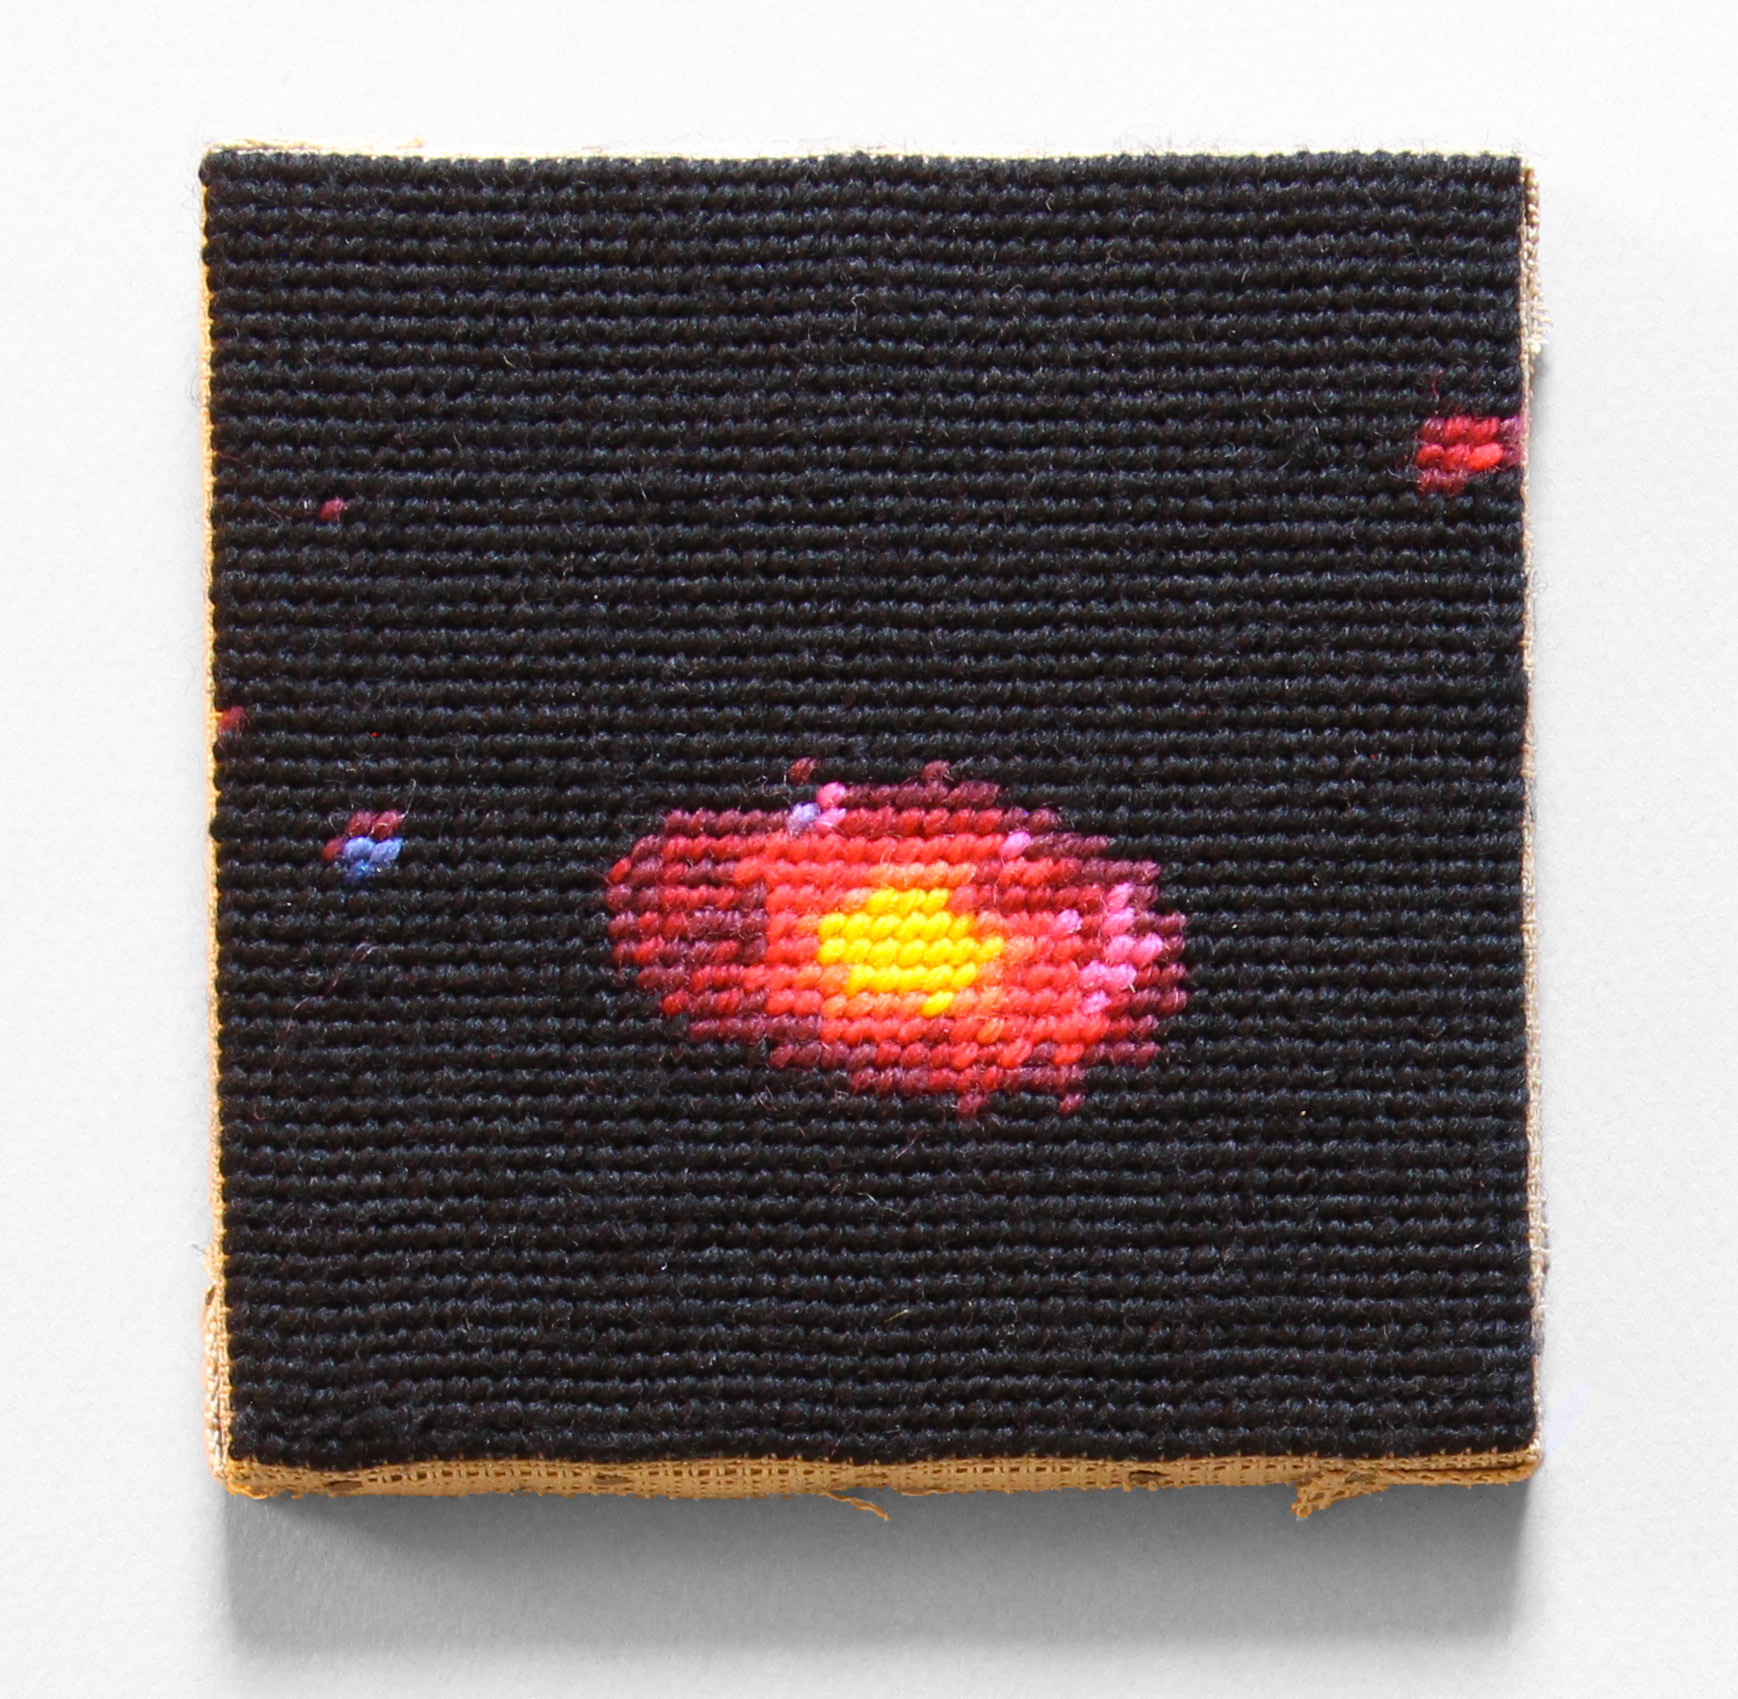  / Needlepoint of a galaxy located in the *Hubble Deep Field*. Art by artist Marine Beaufils.